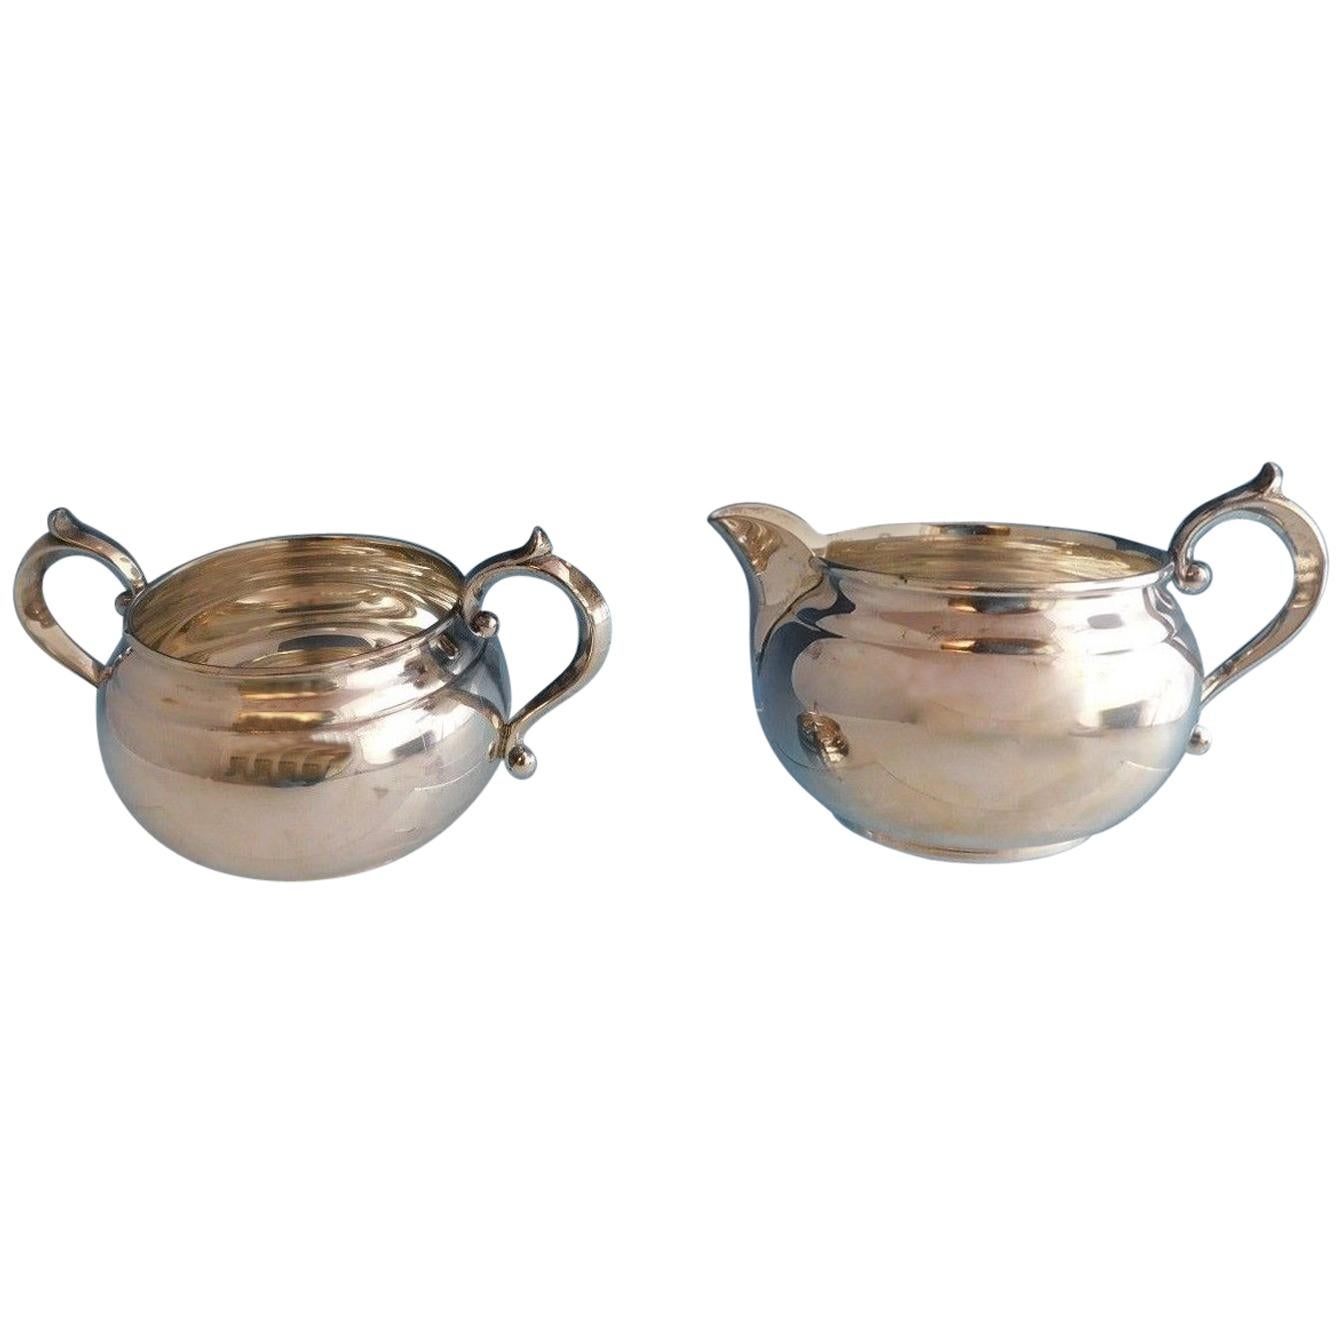 Old French by Gorham Sterling Silver Sugar and Creamer Set of 2 Pieces